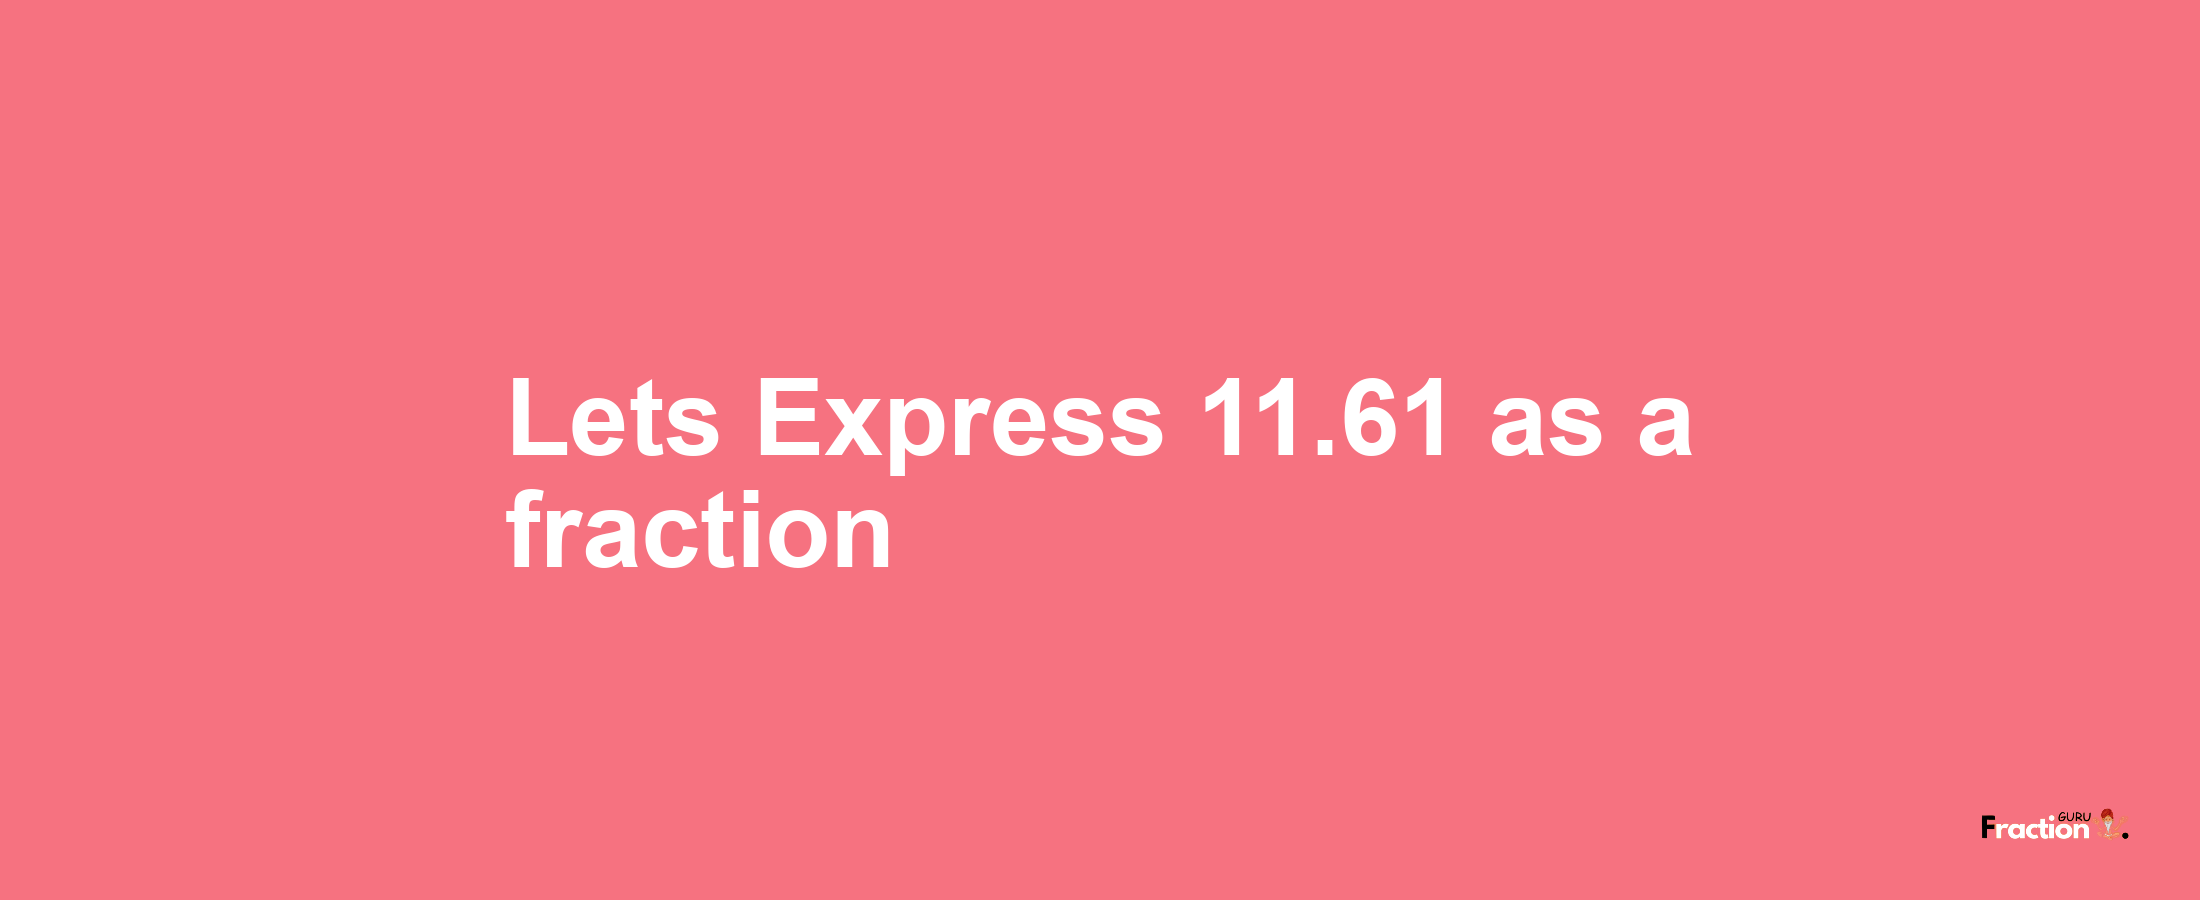 Lets Express 11.61 as afraction